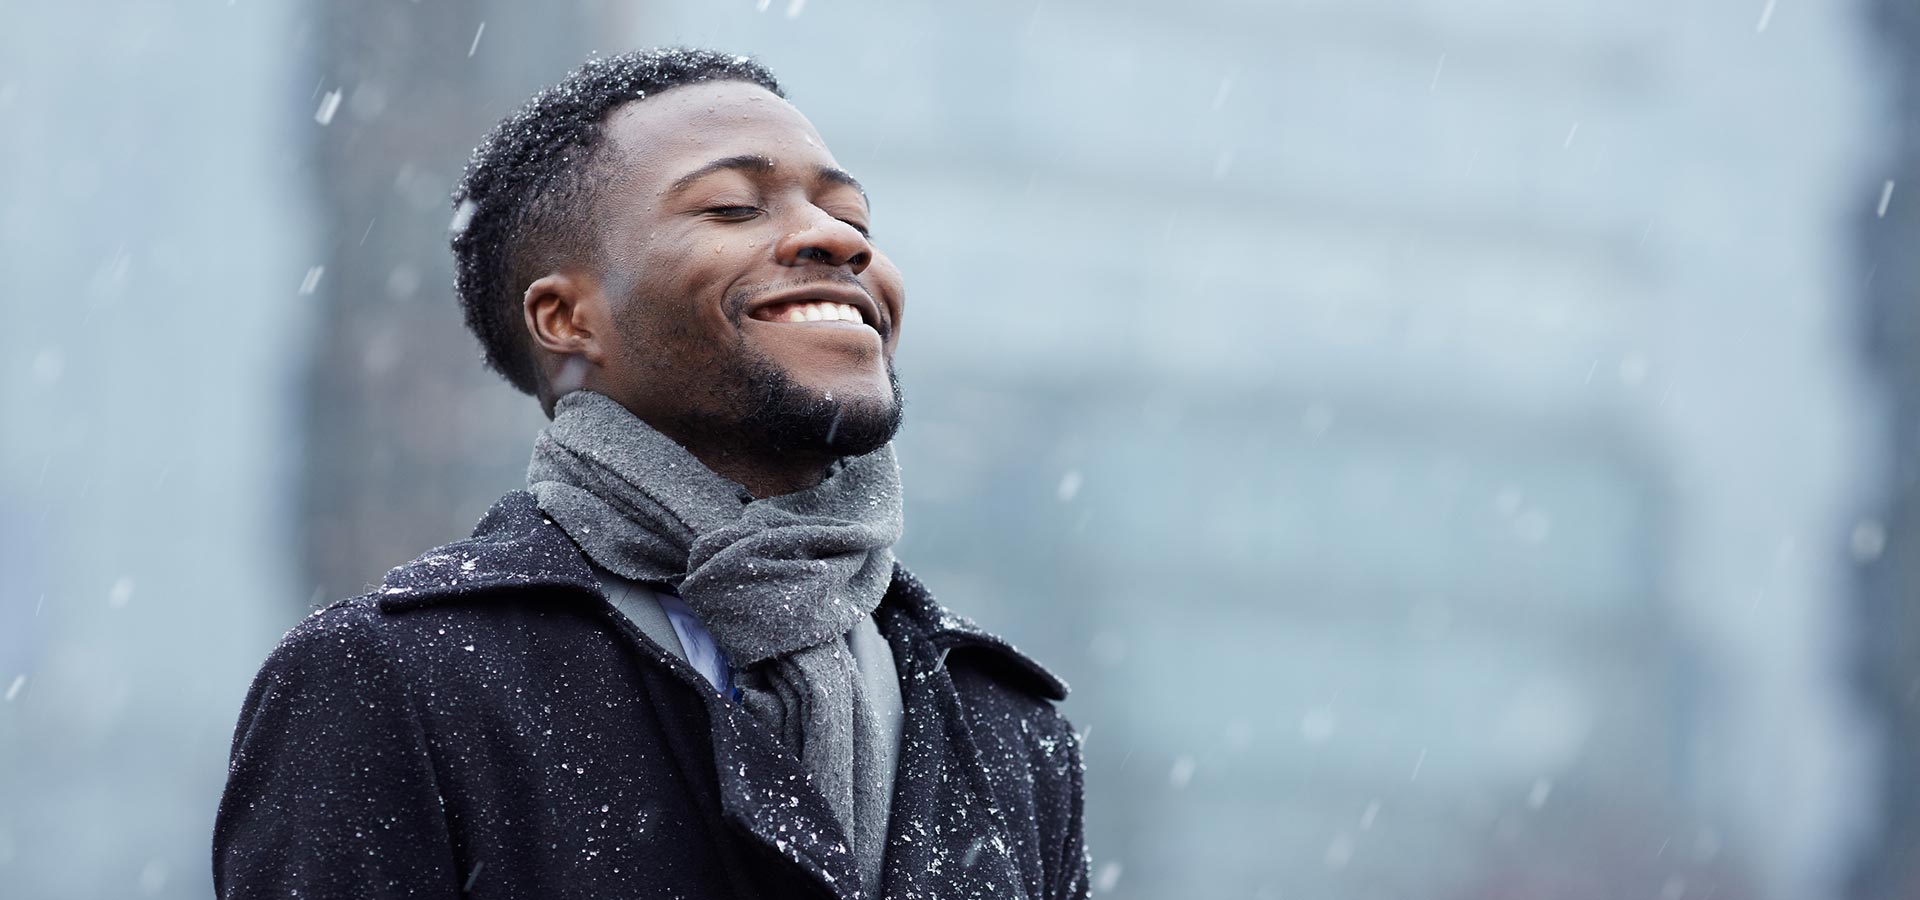 Beating the Cold Weather Blues: Solutions for When You’re Feeling SAD